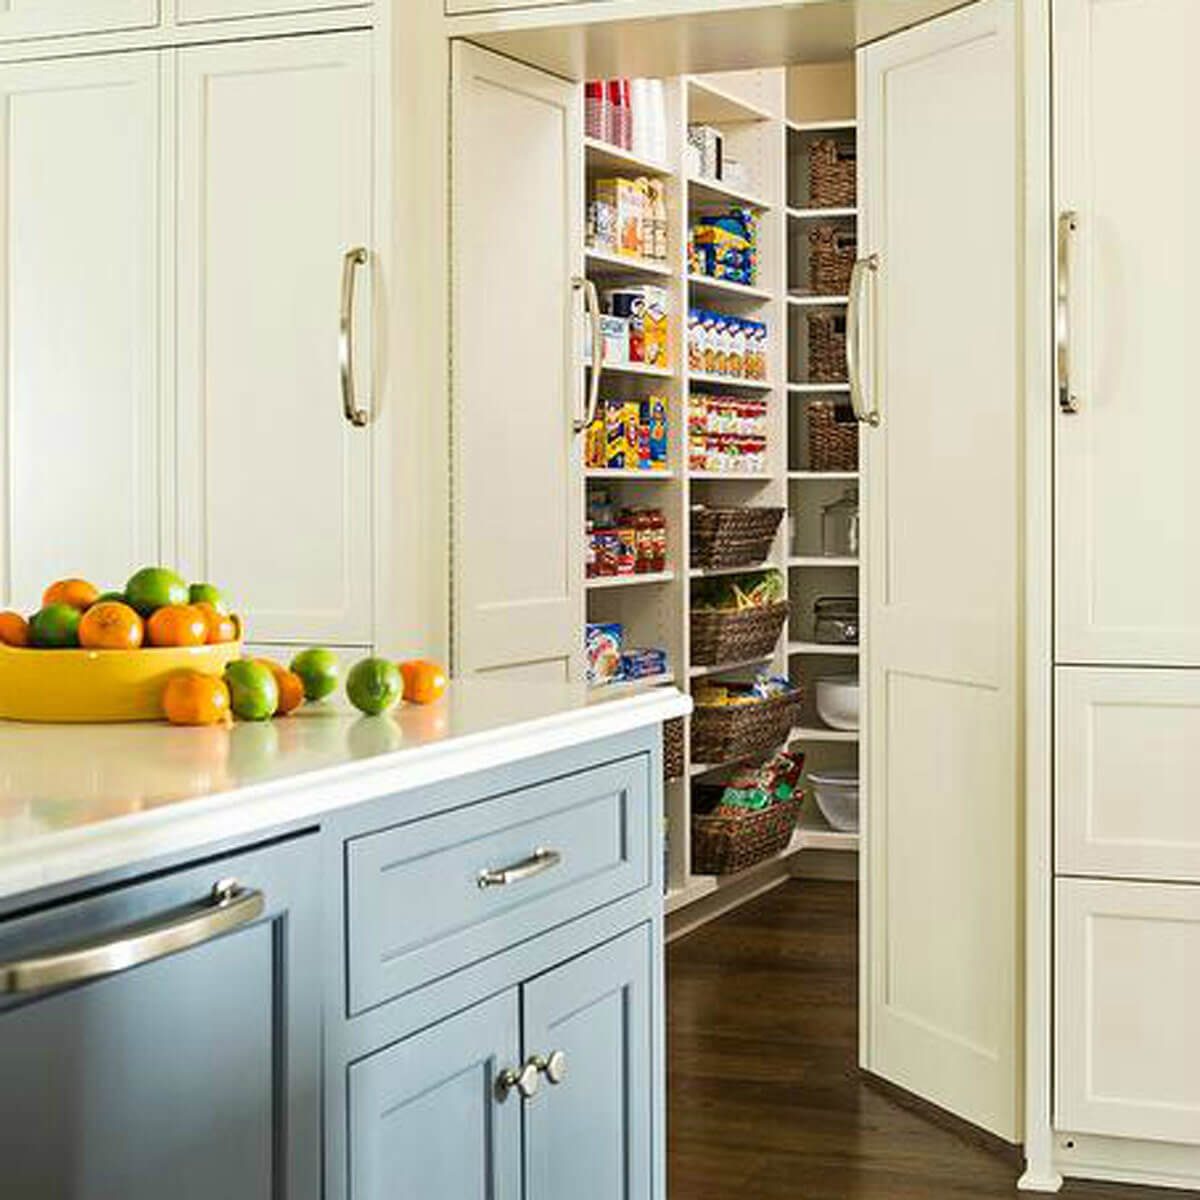 10 Genius Ideas For Building A Pantry, Built In Kitchen Pantry Cabinet Ideas